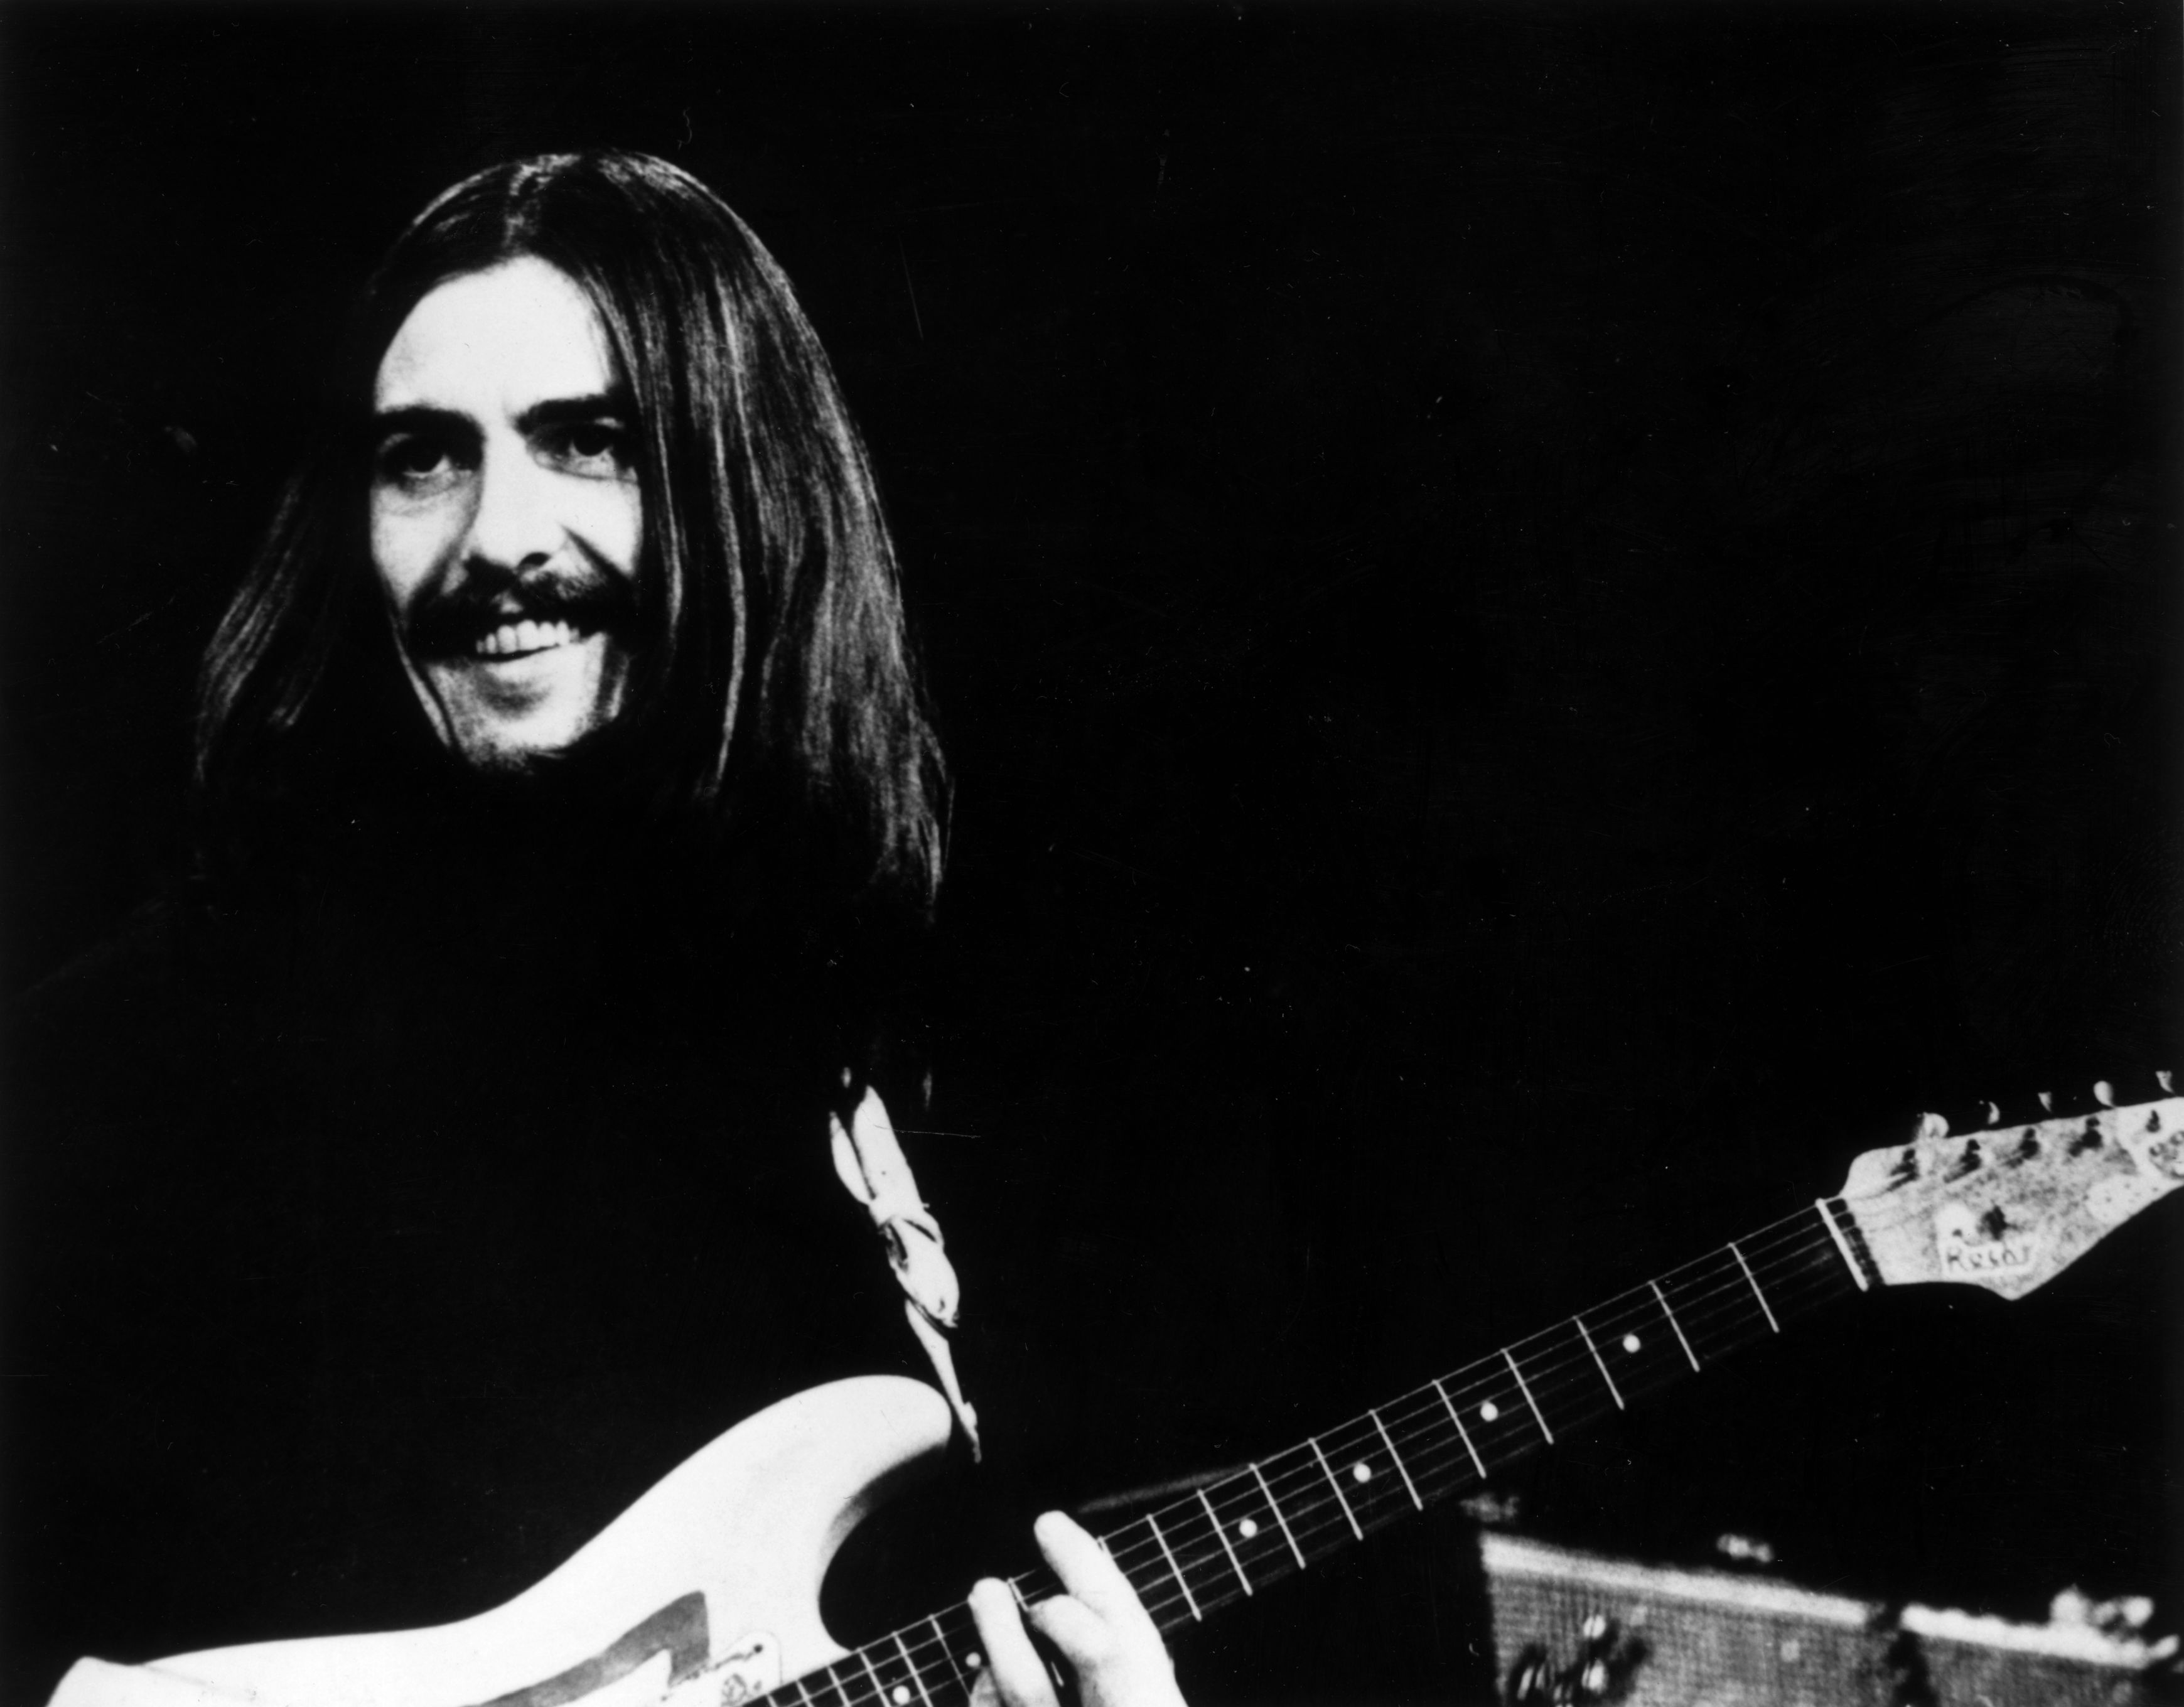 George Harrison with a guitar during The Beatles' 'The White Album' era